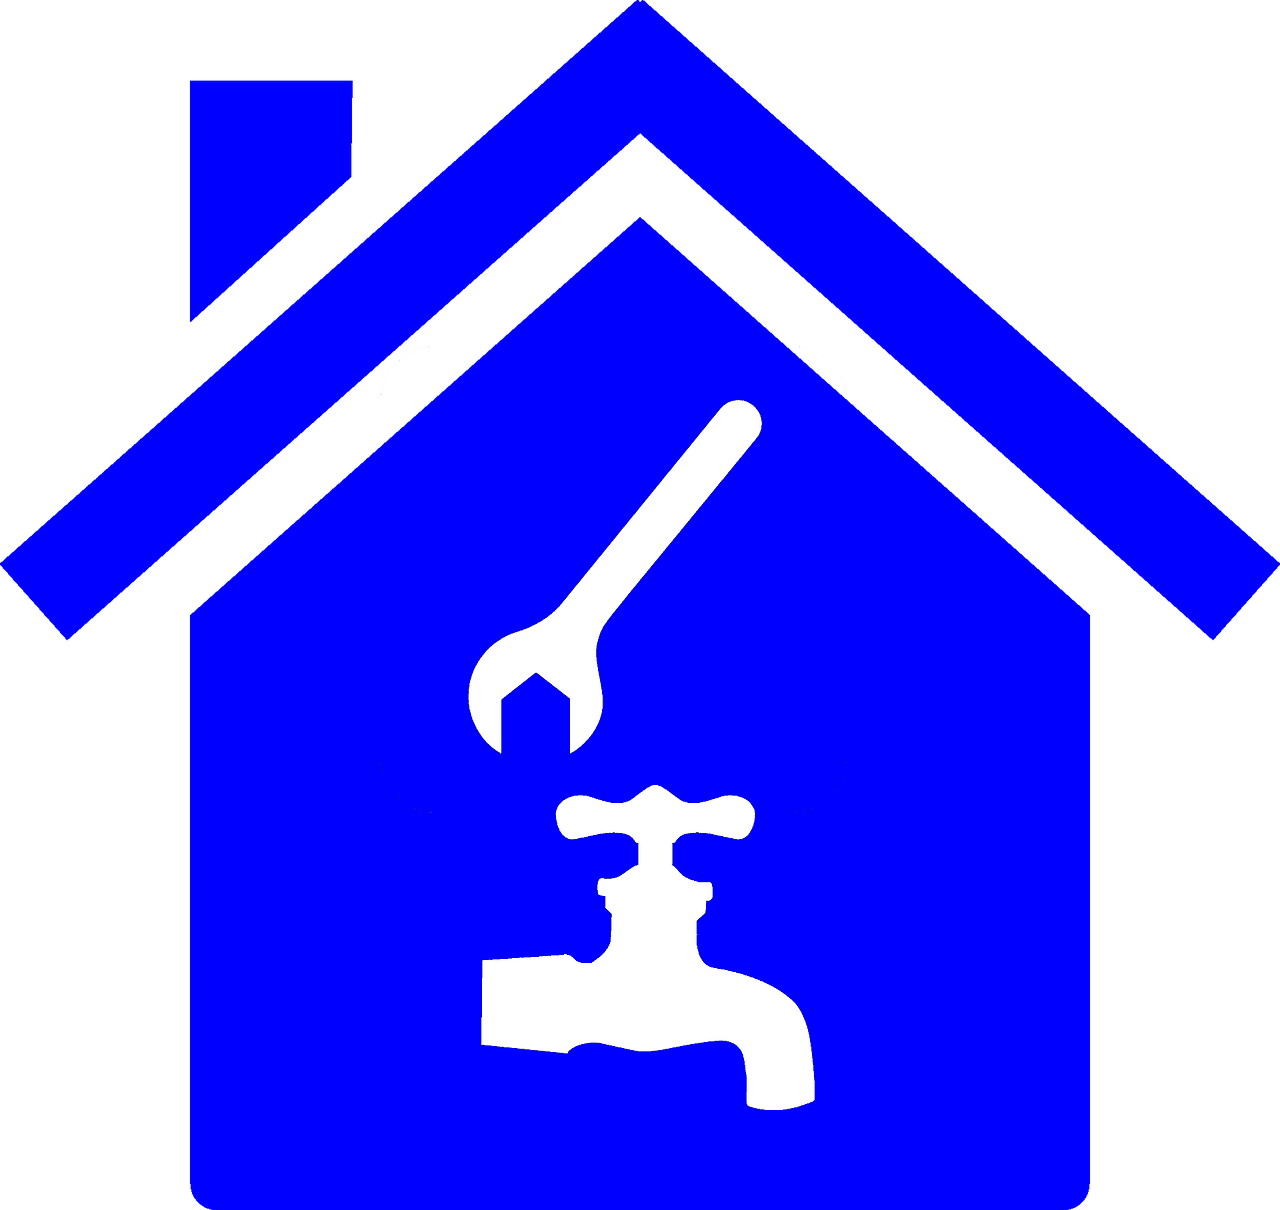 Most Common Plumbing Problems and How to Fix Them